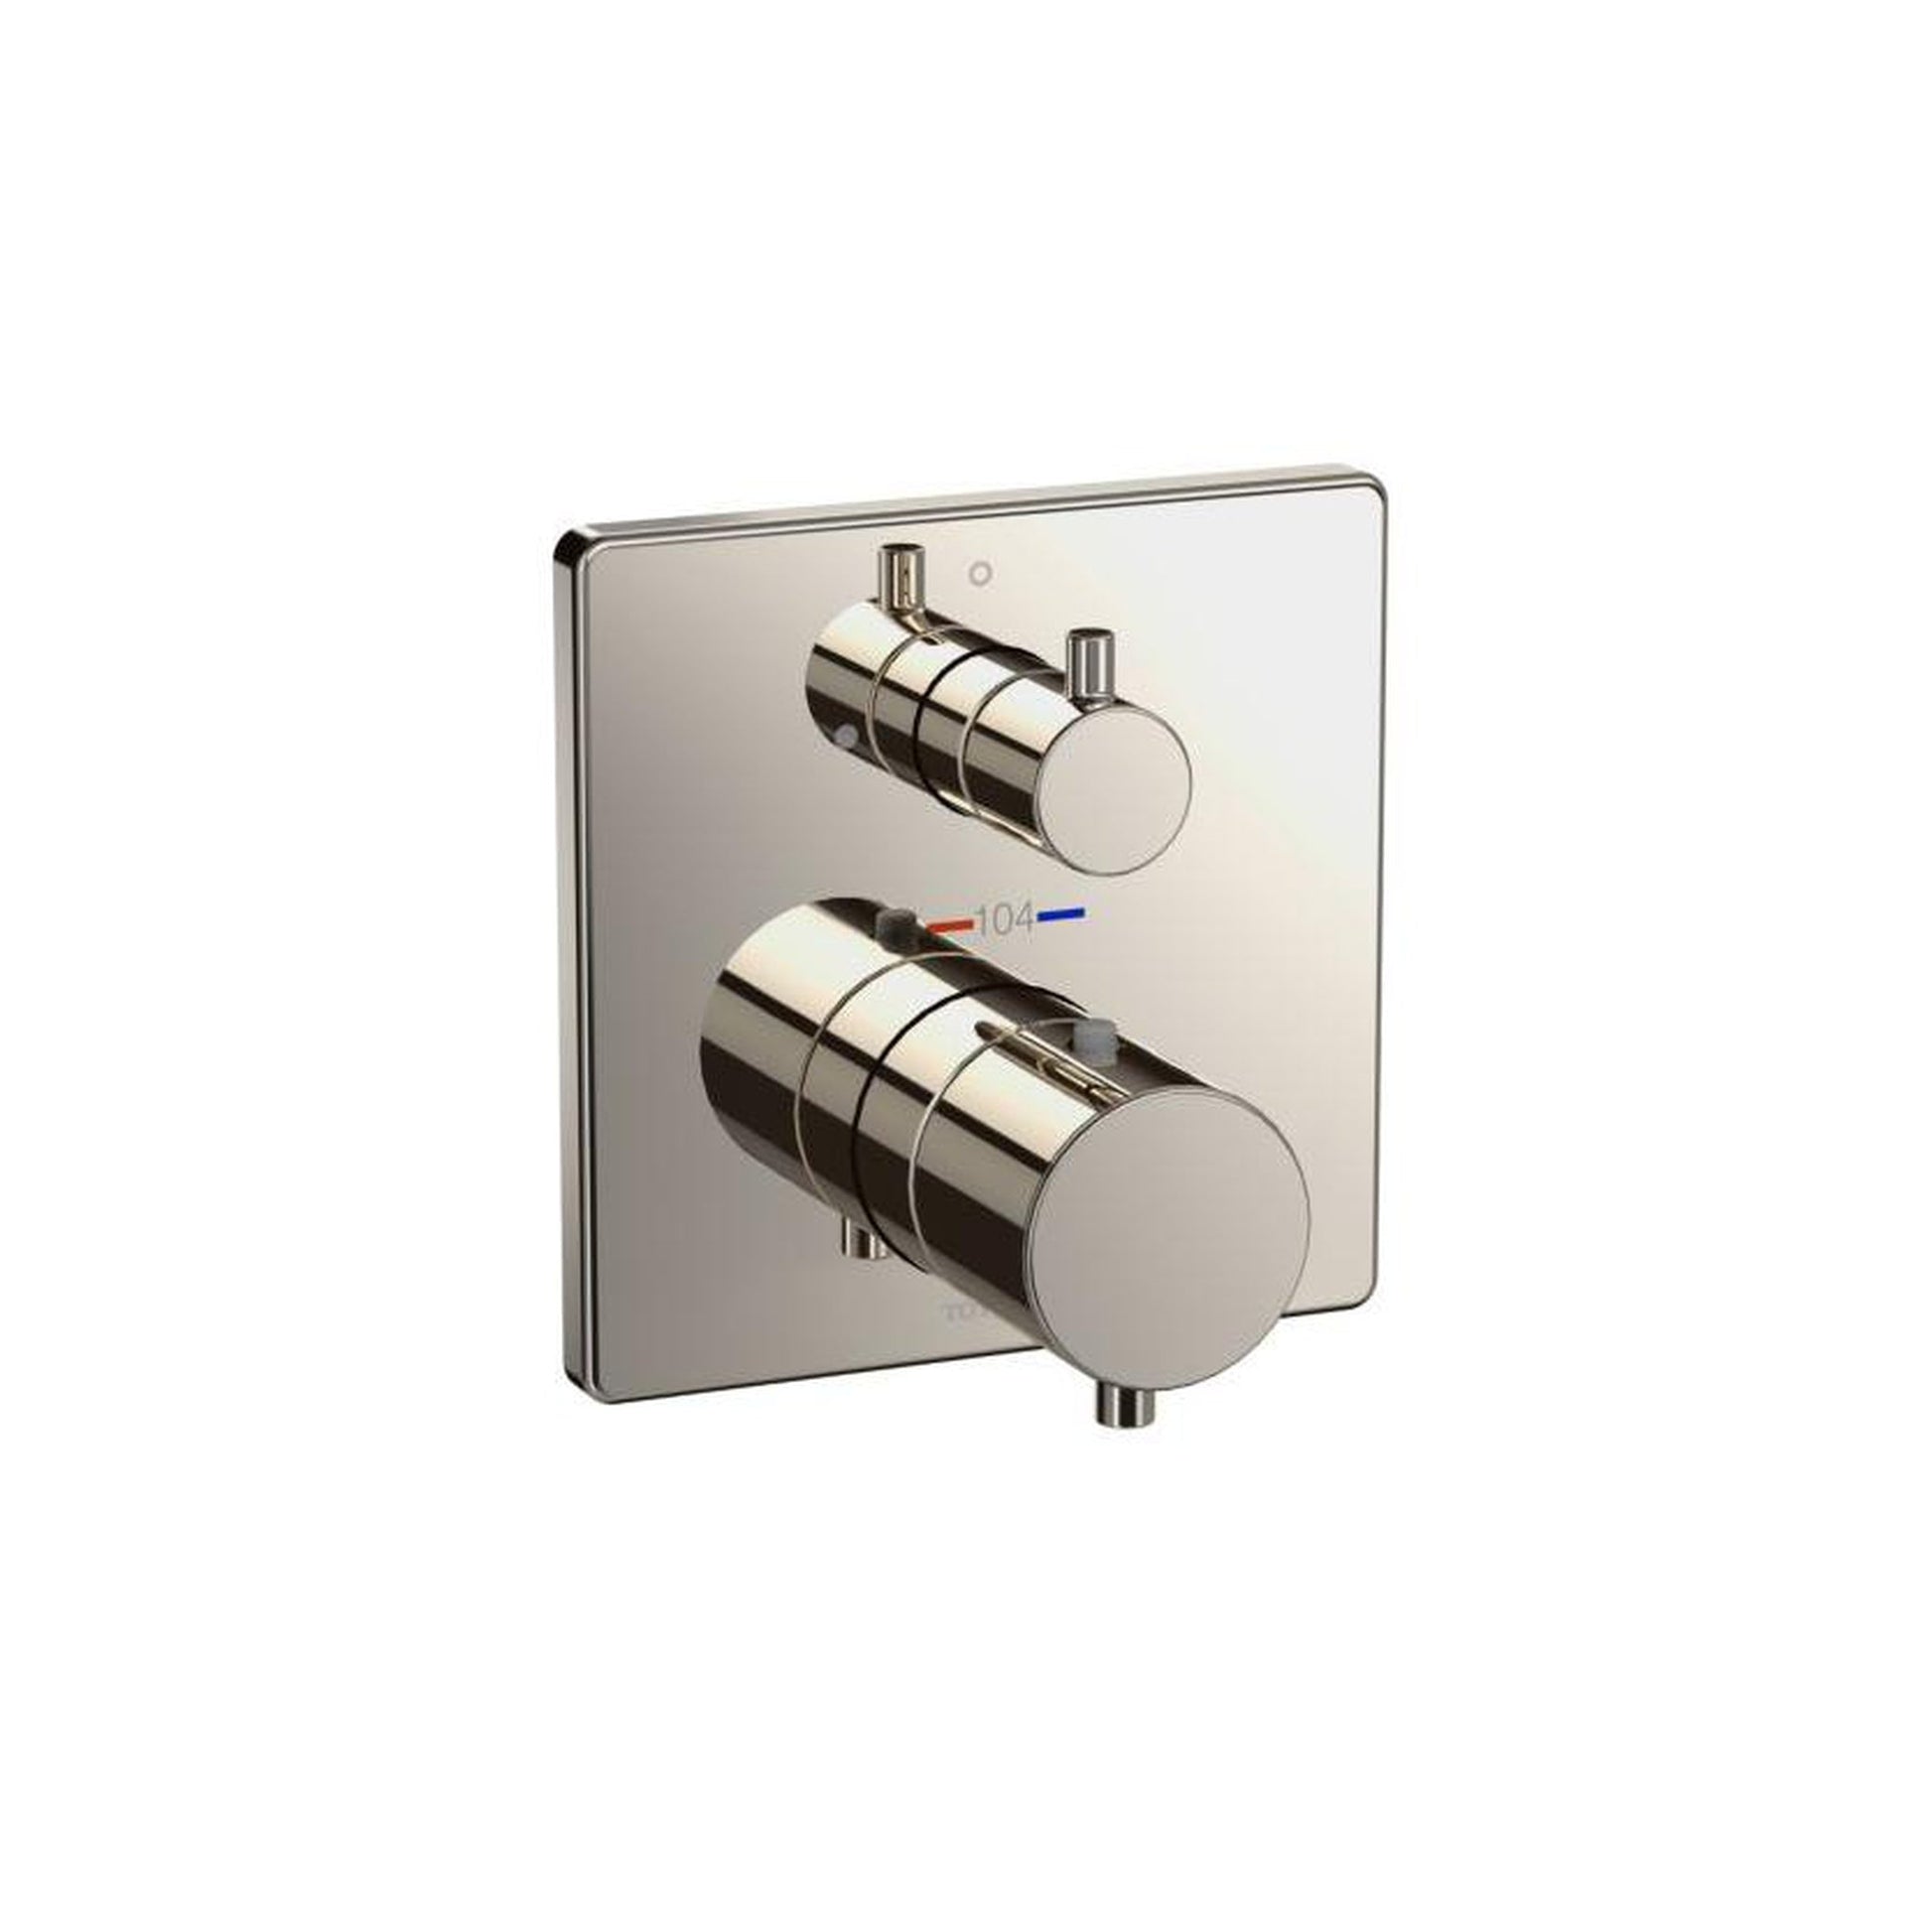 Toto Thermo Vol CTRL Valve,G,Square Polished Nickel